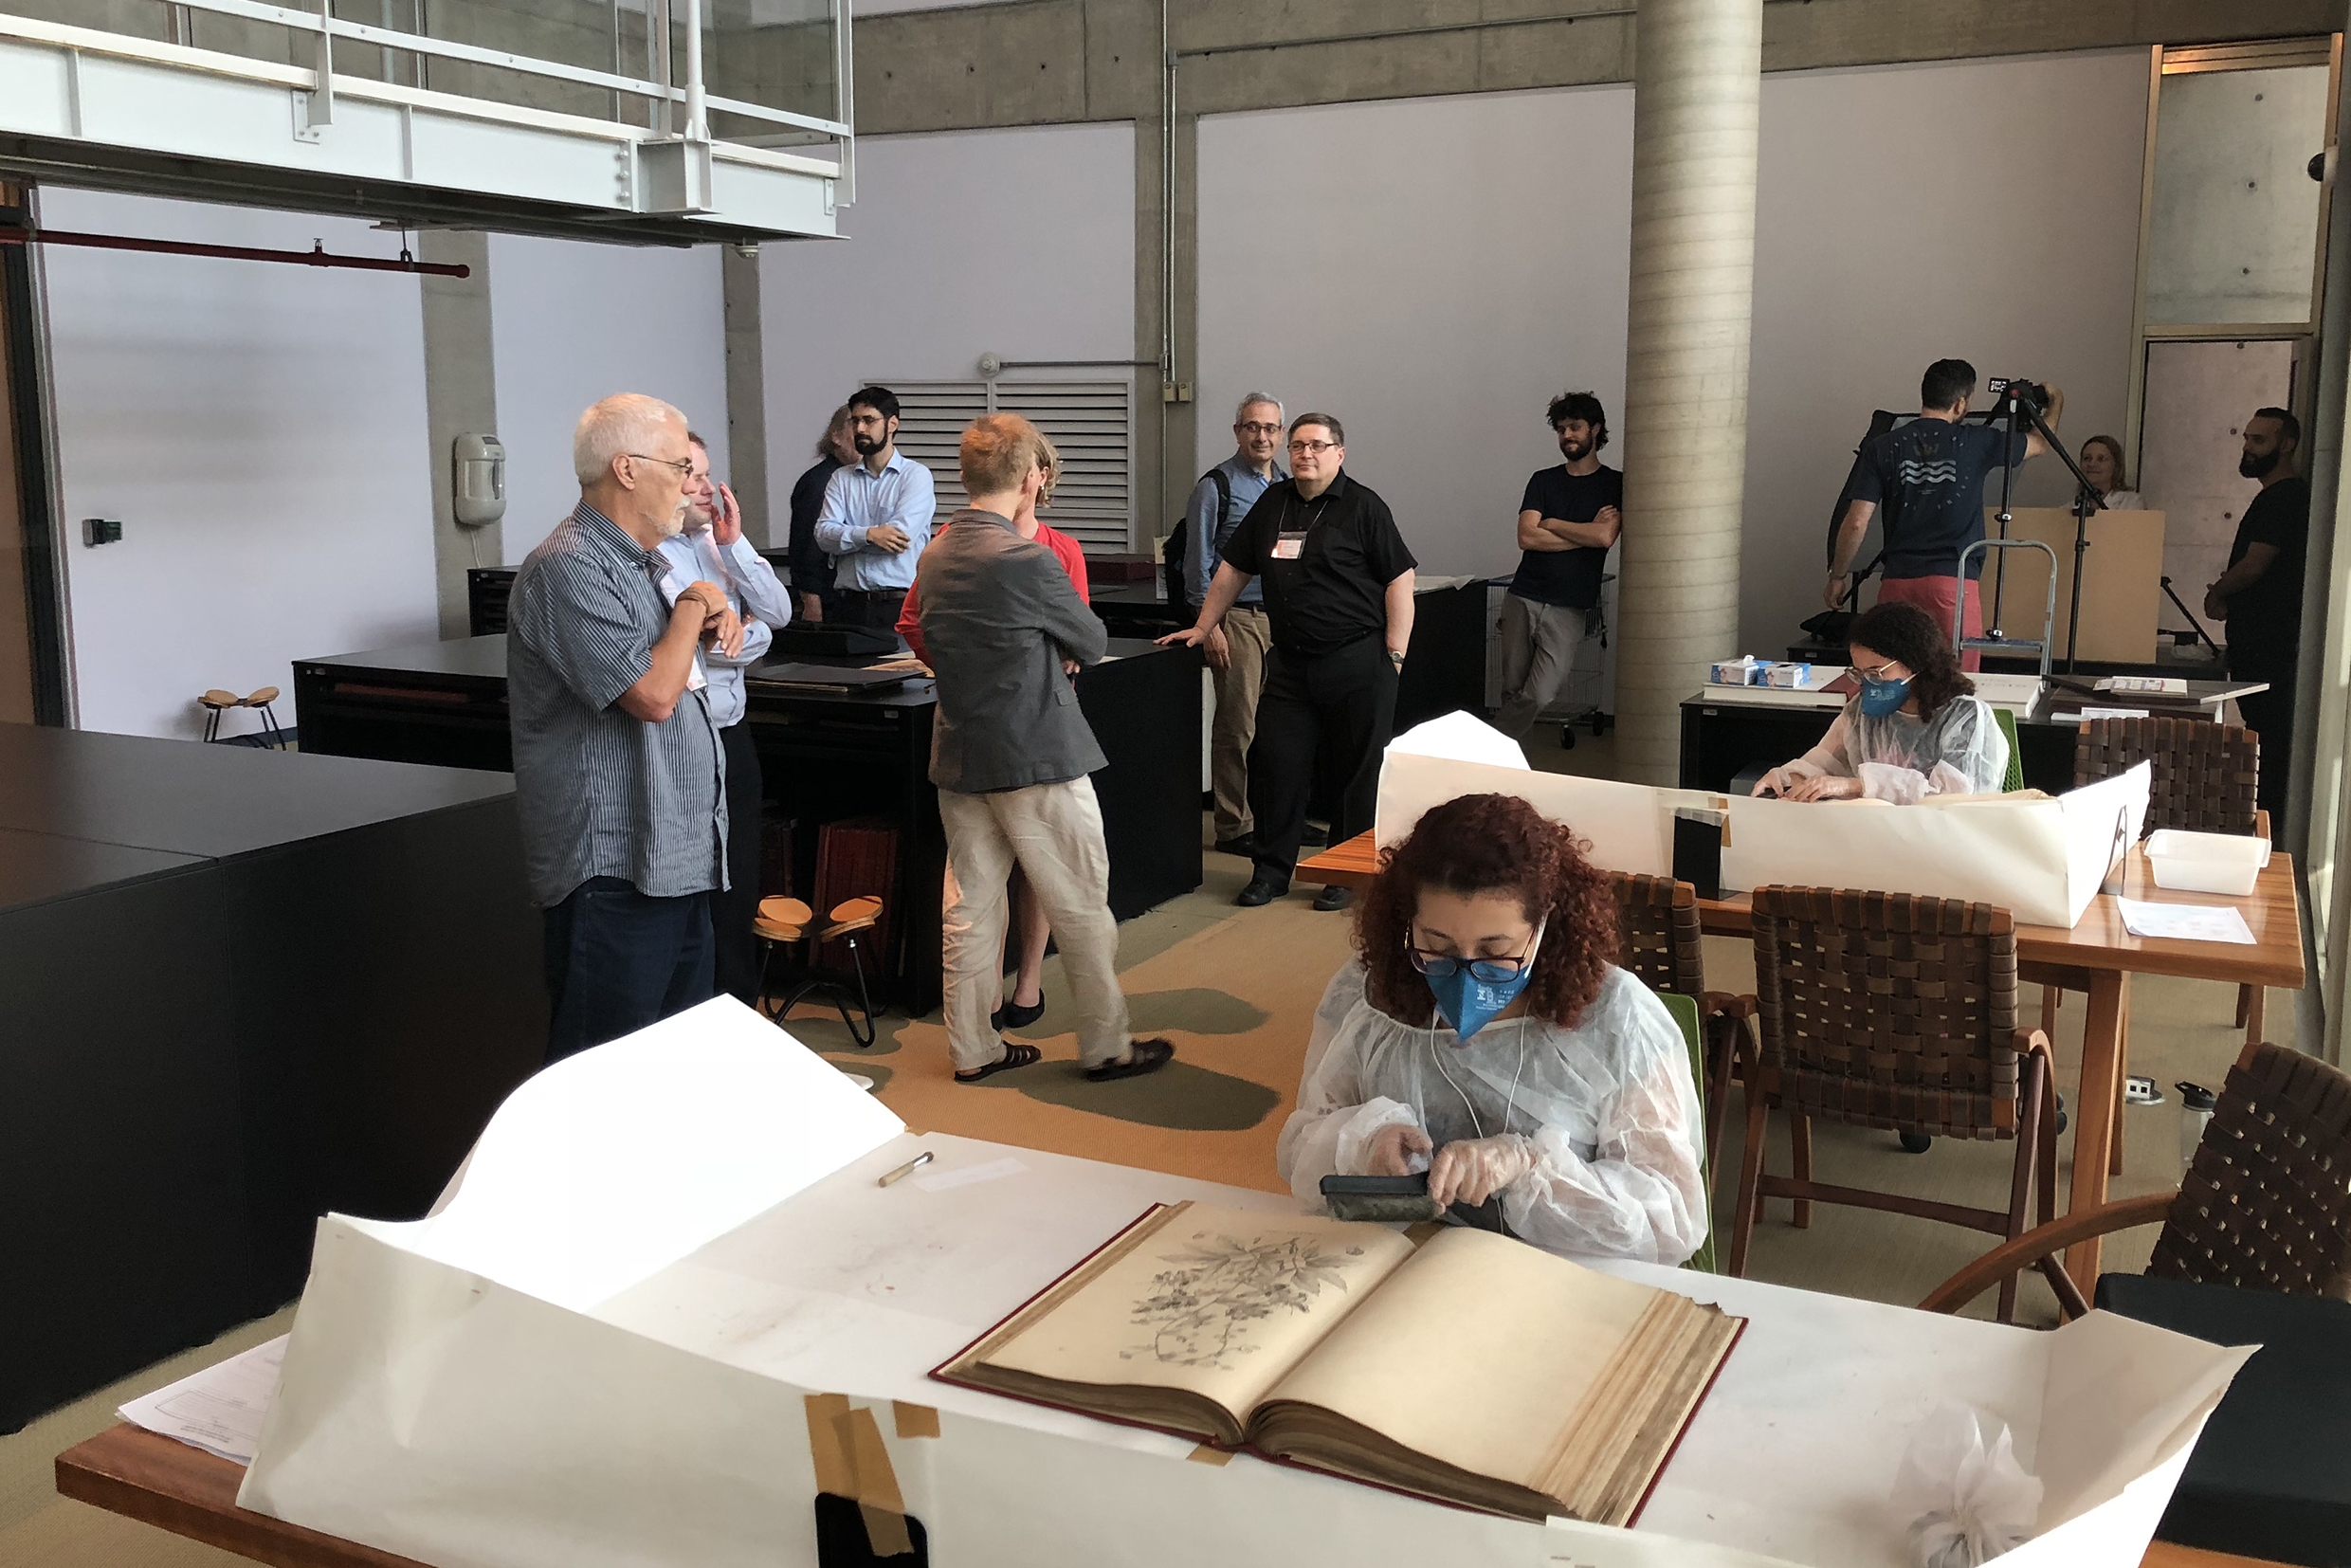 Participants observe the work of archive conservation at the Brasiliana Guita e José Mindlin Library